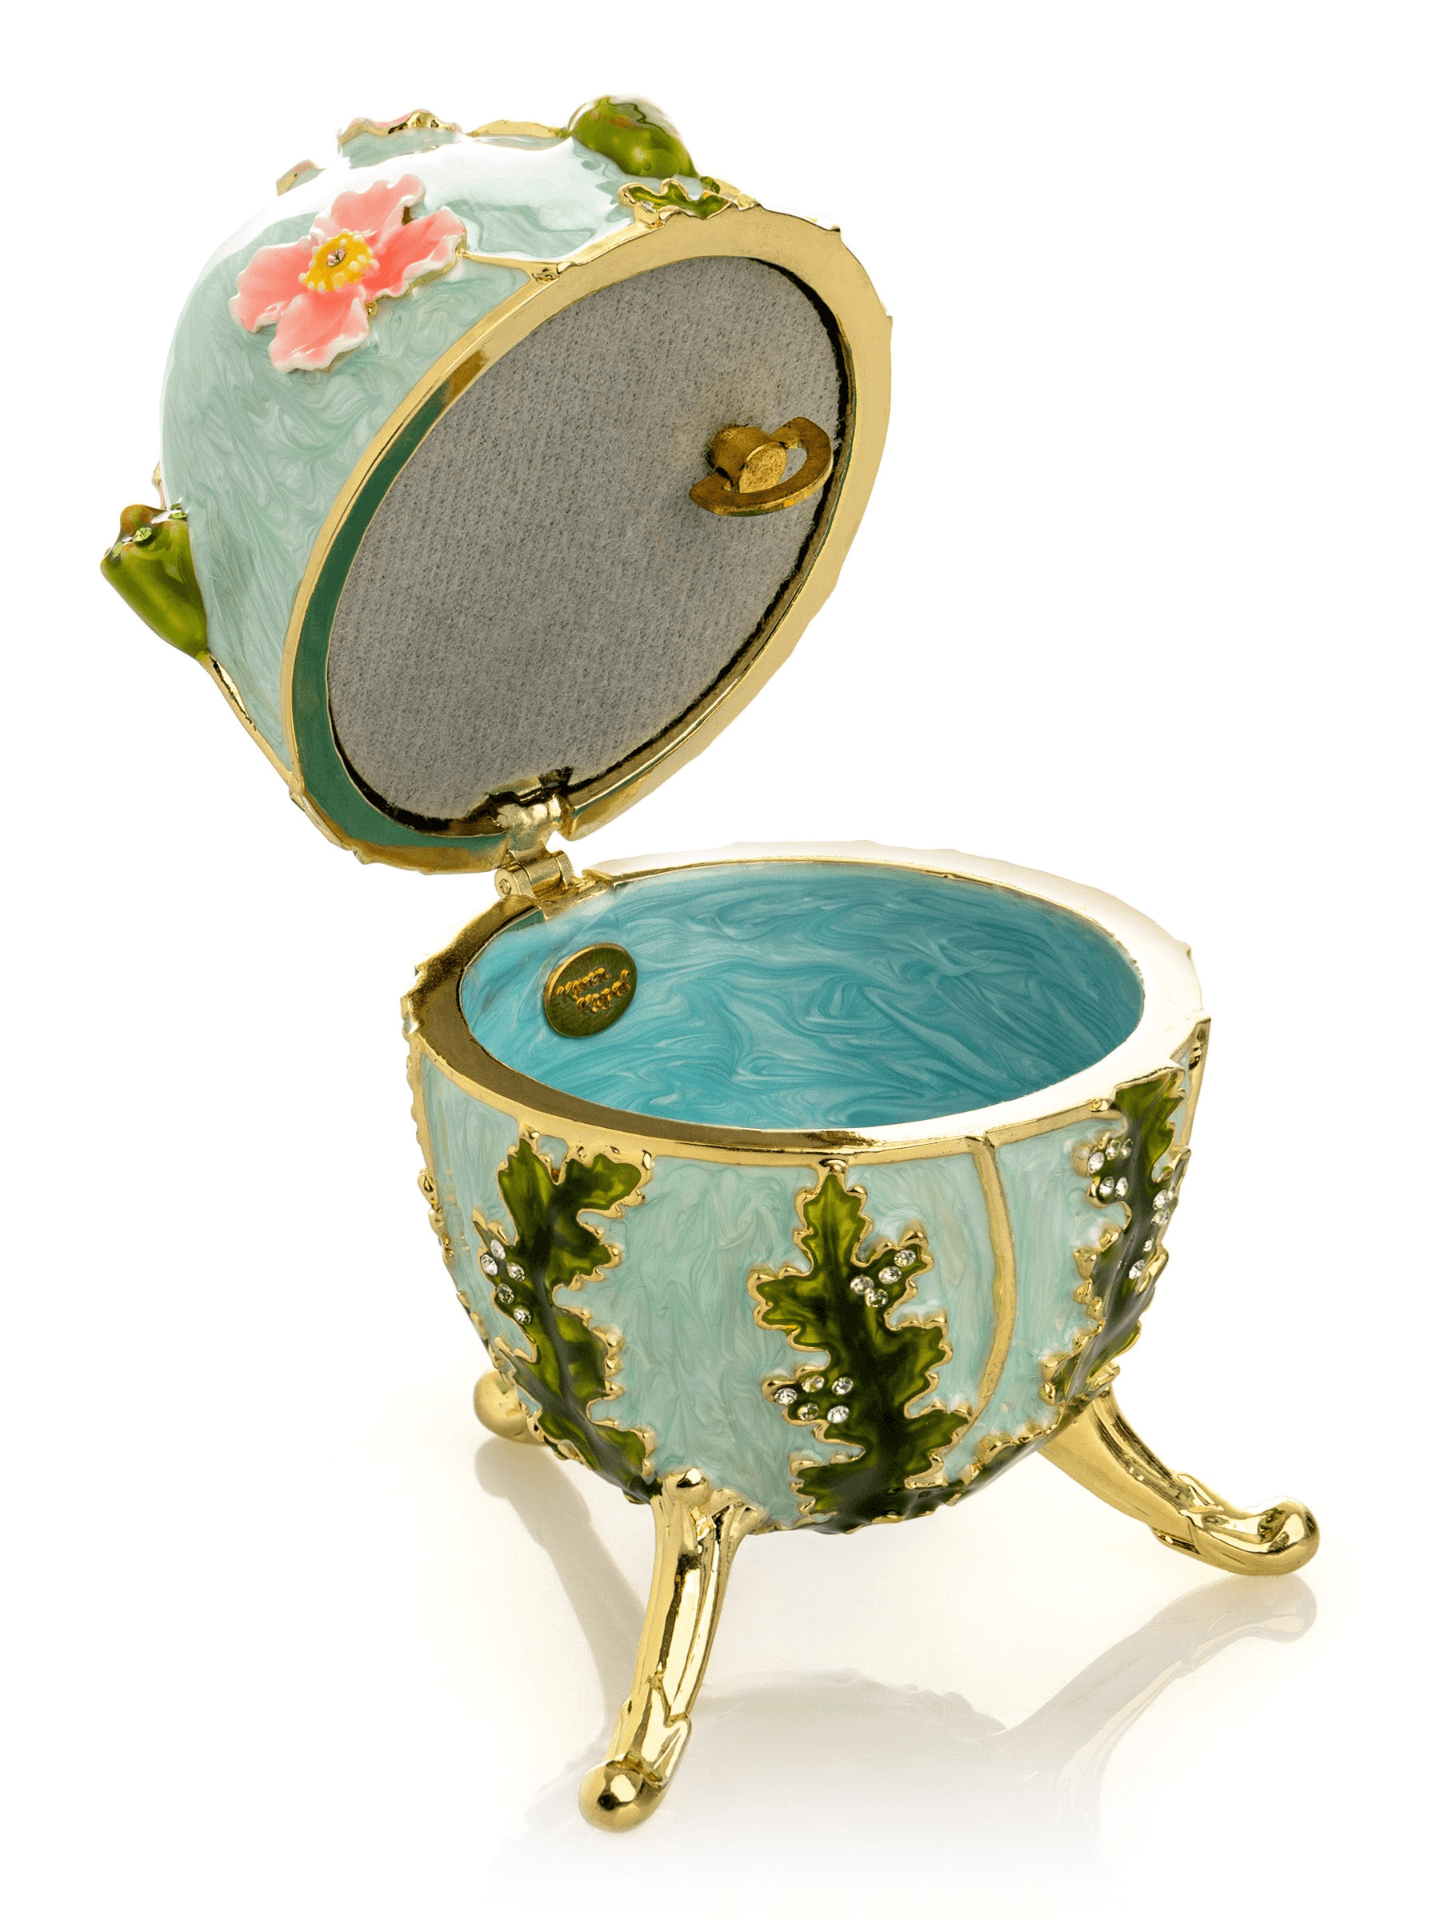 Turquoise Faberge Egg with Flowers  